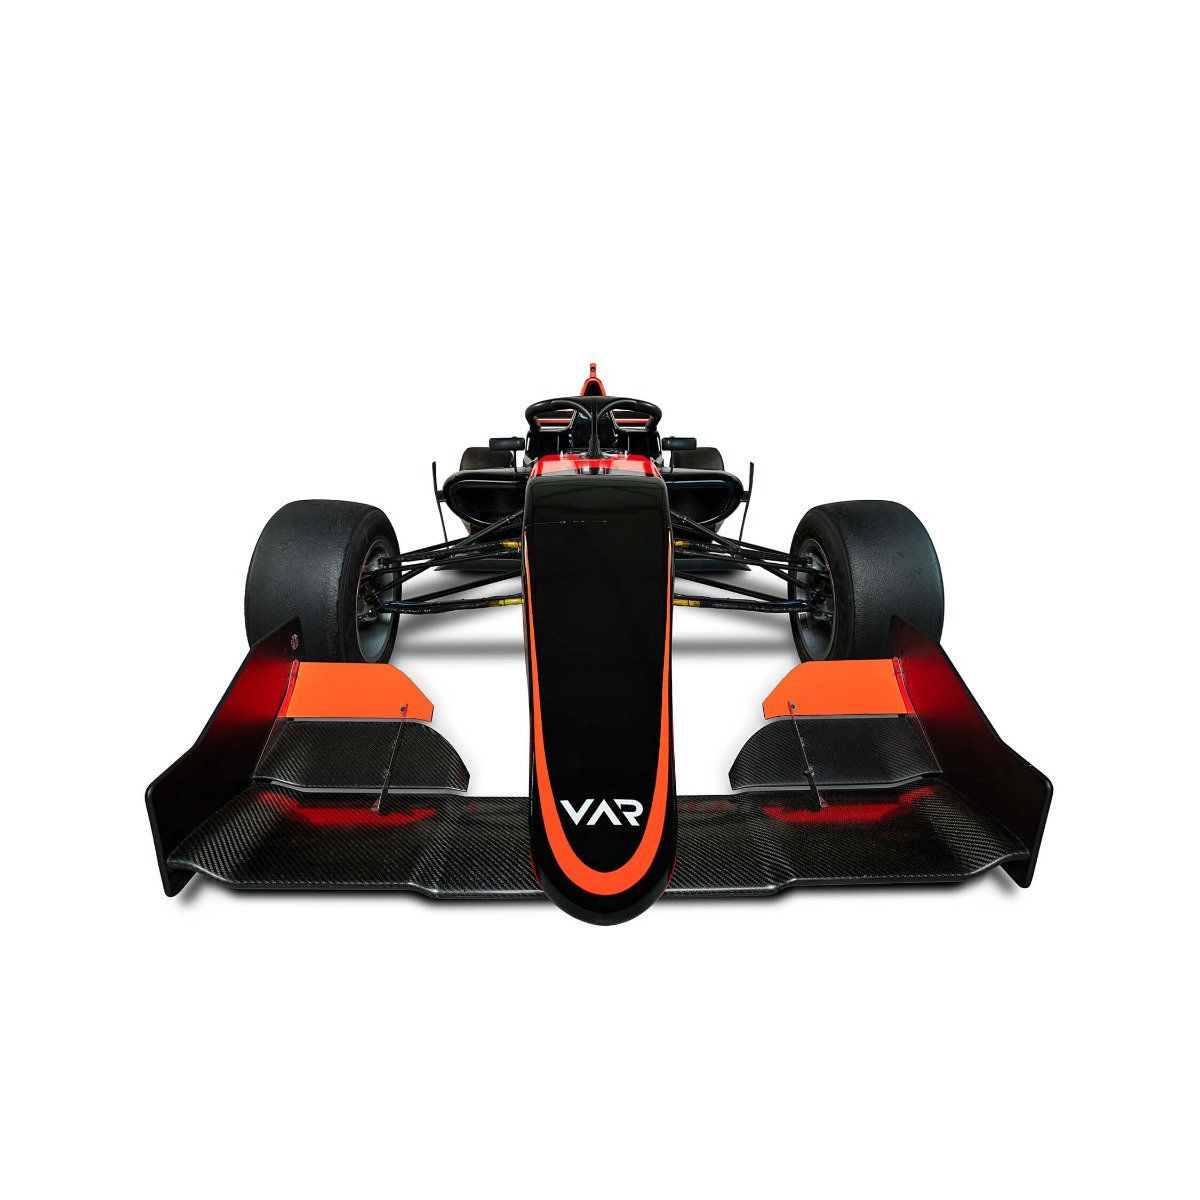 Formula 3 - Lower front view